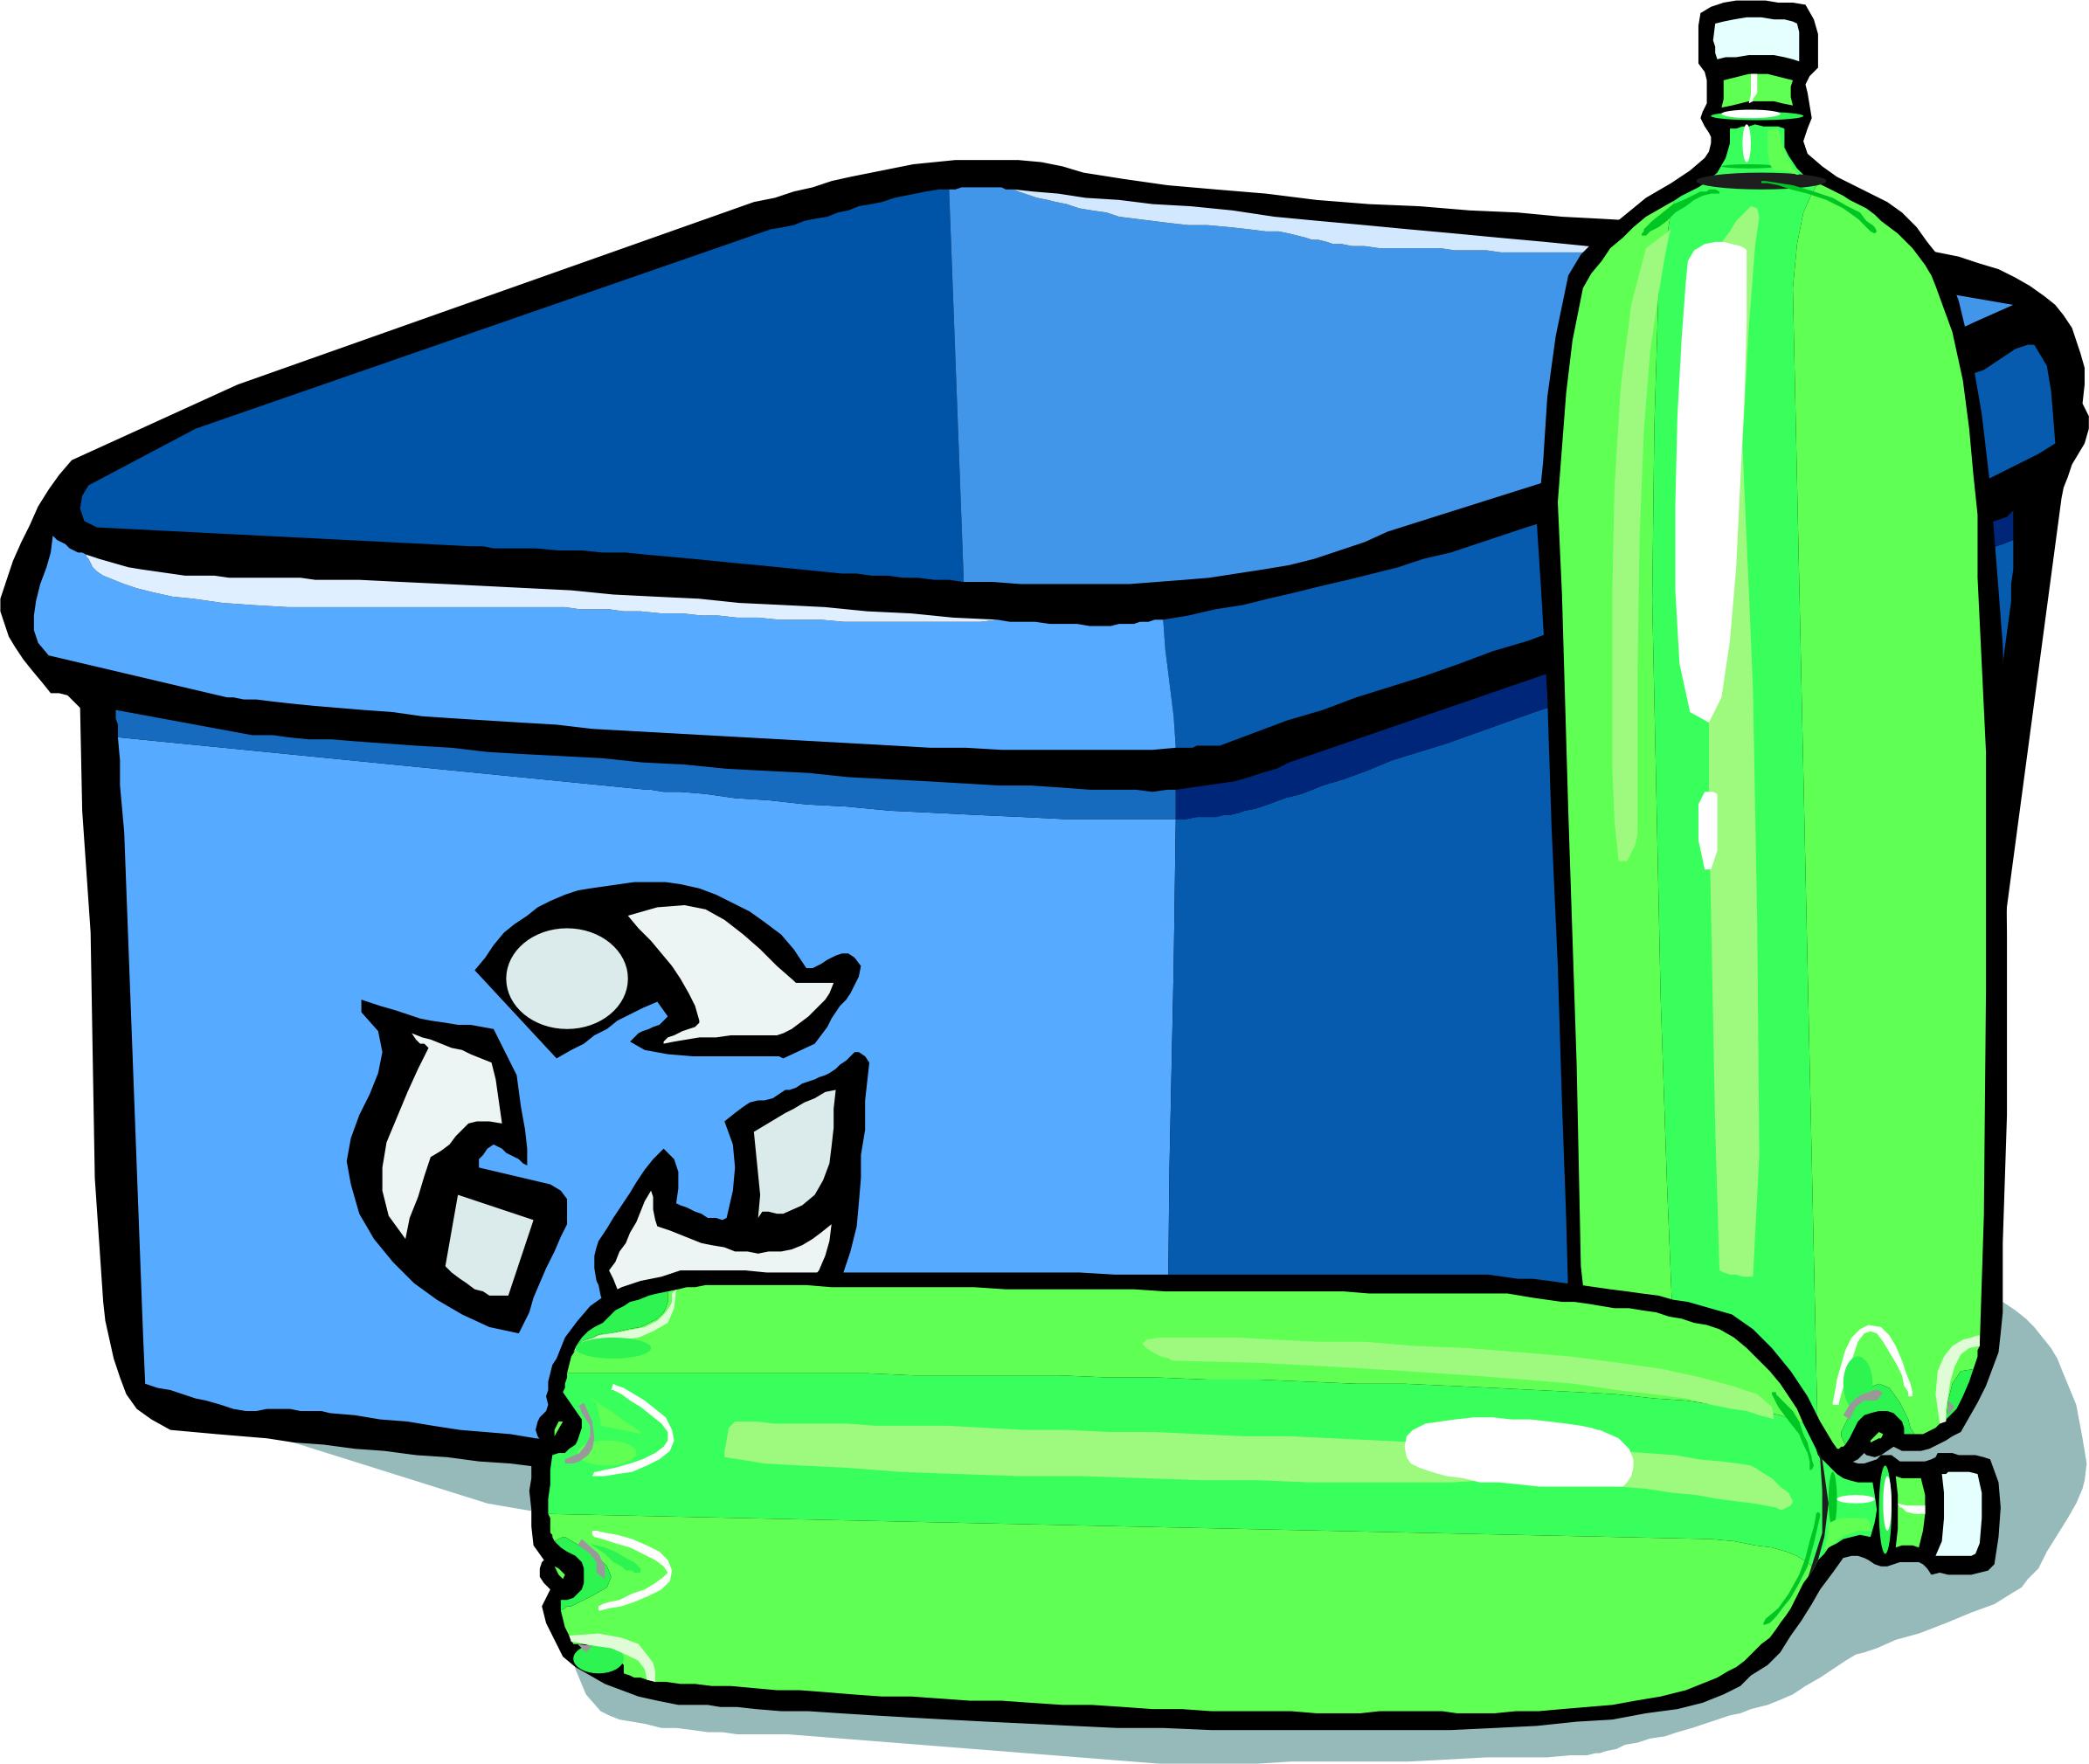 Recycling bin and bottles png